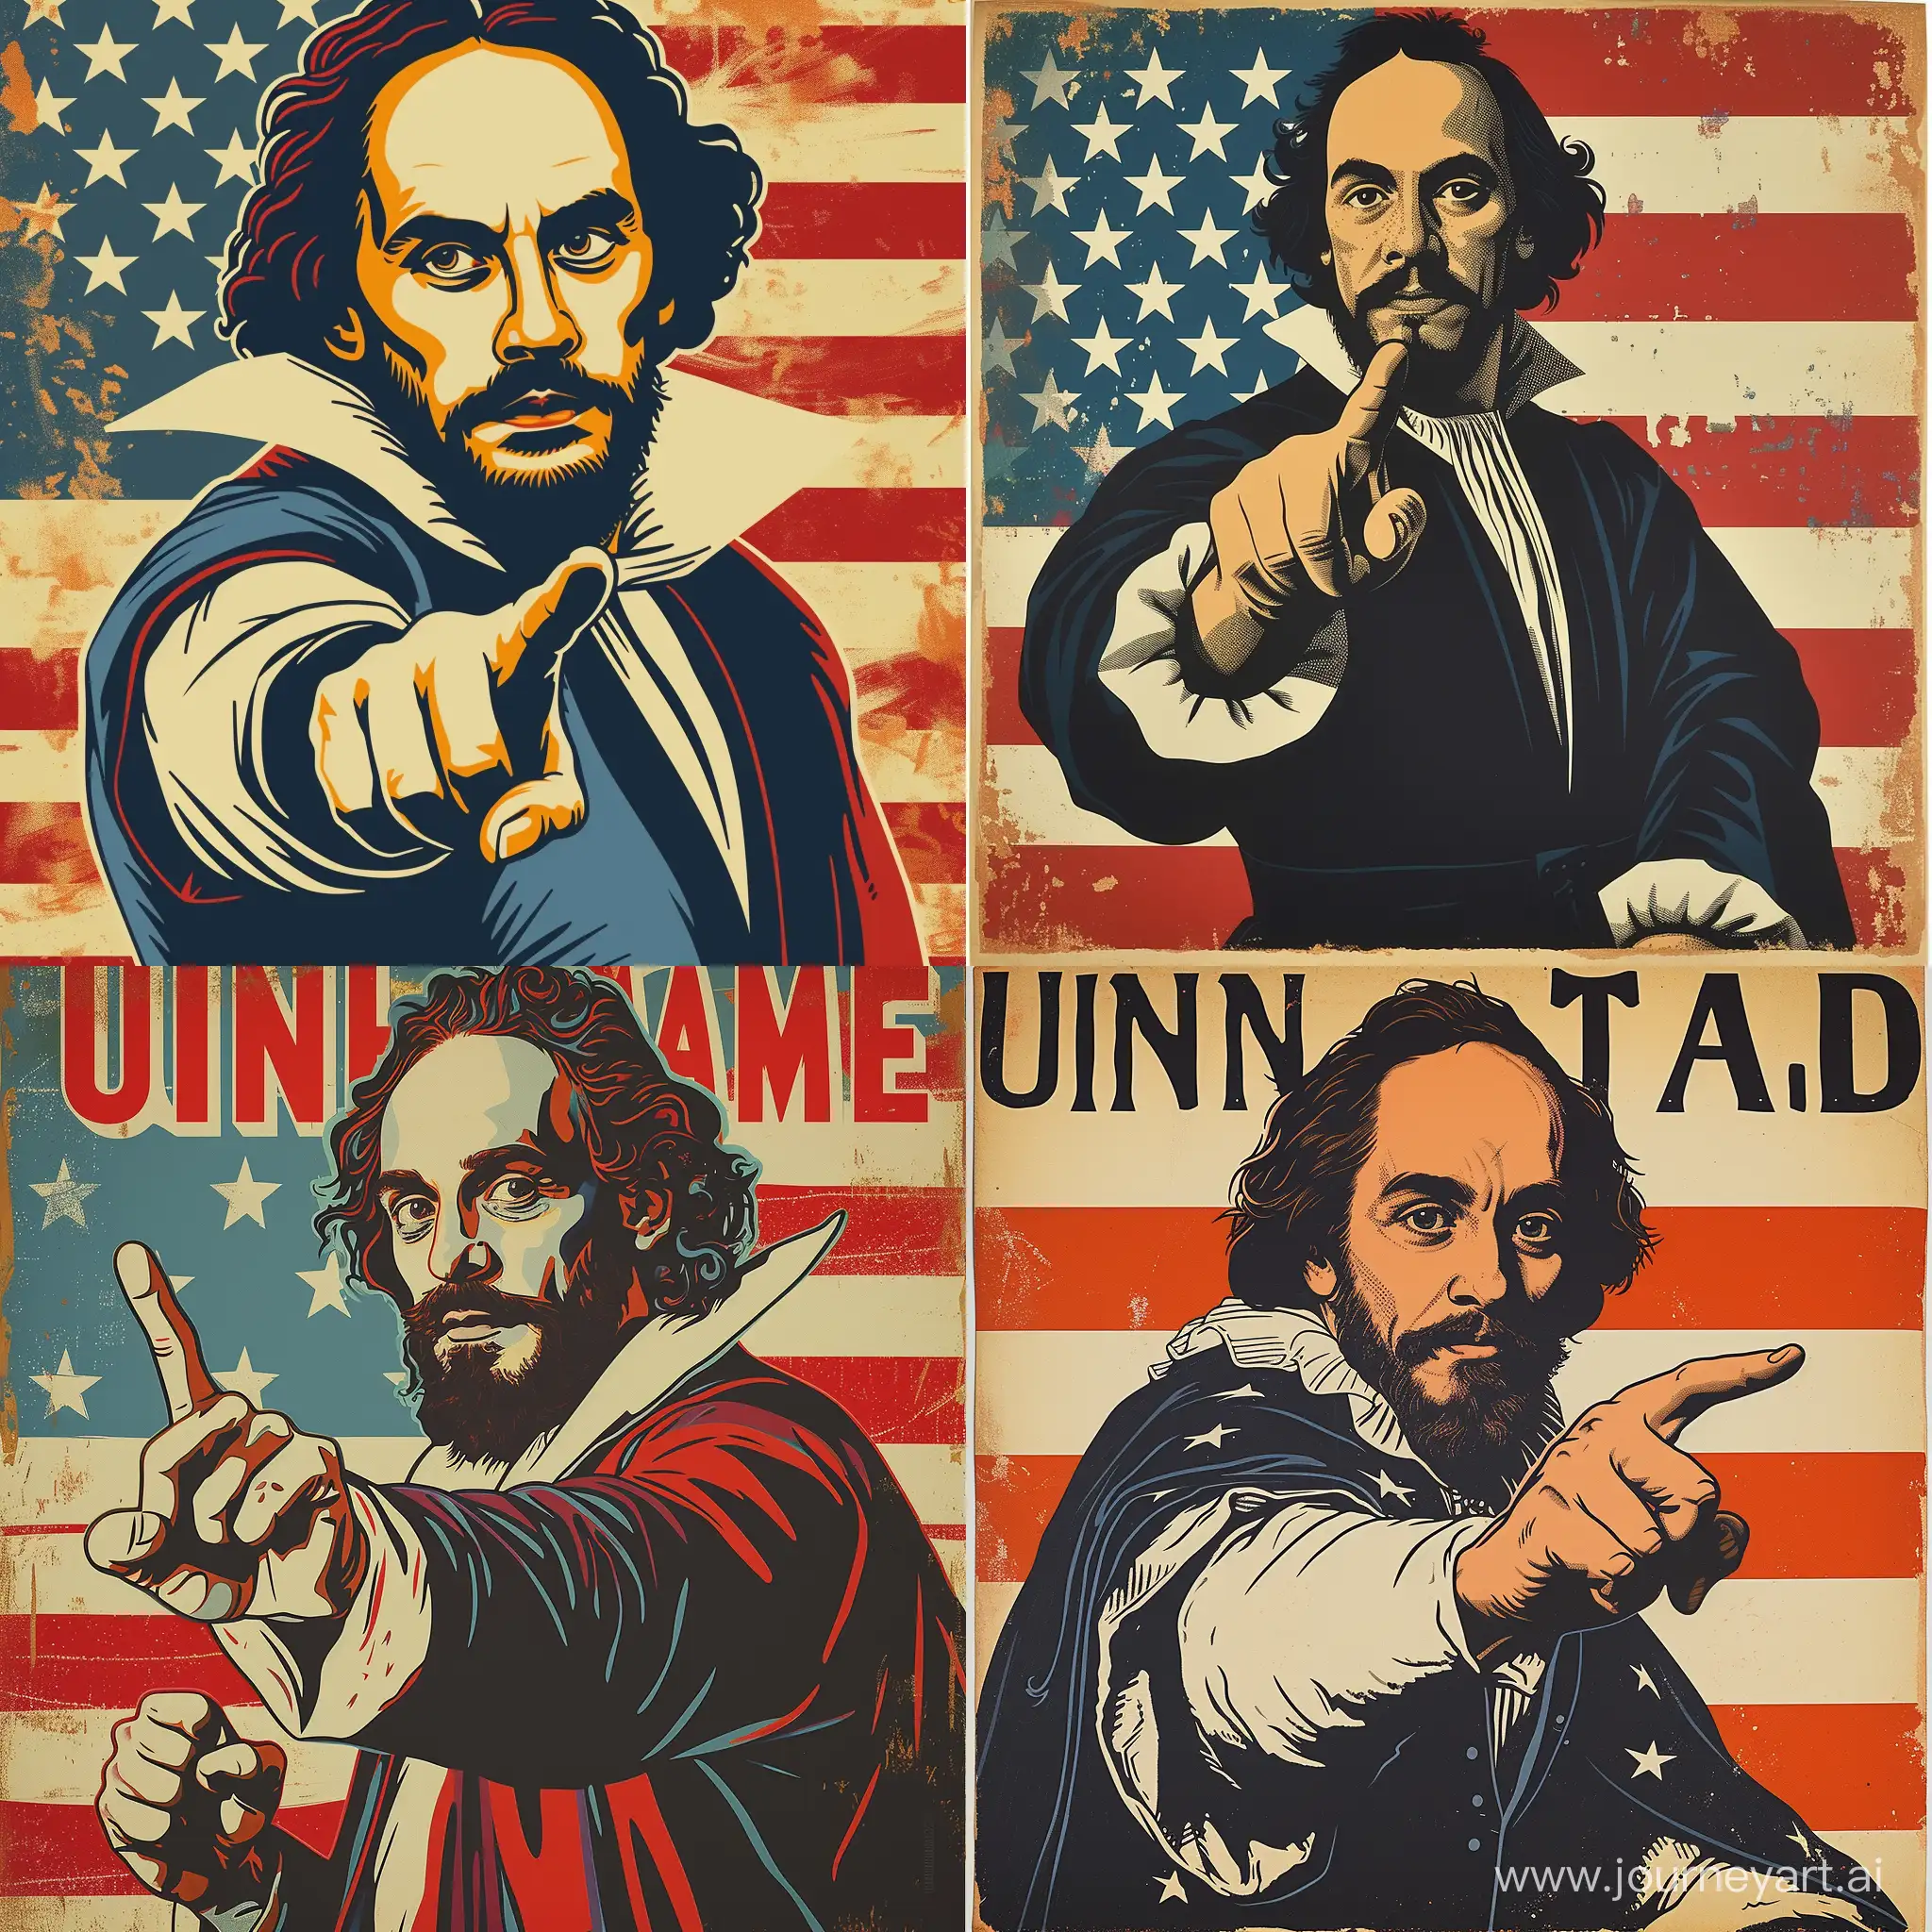 William Shakespeare points his finger at you in the style of the American poster "Uncle Sam"